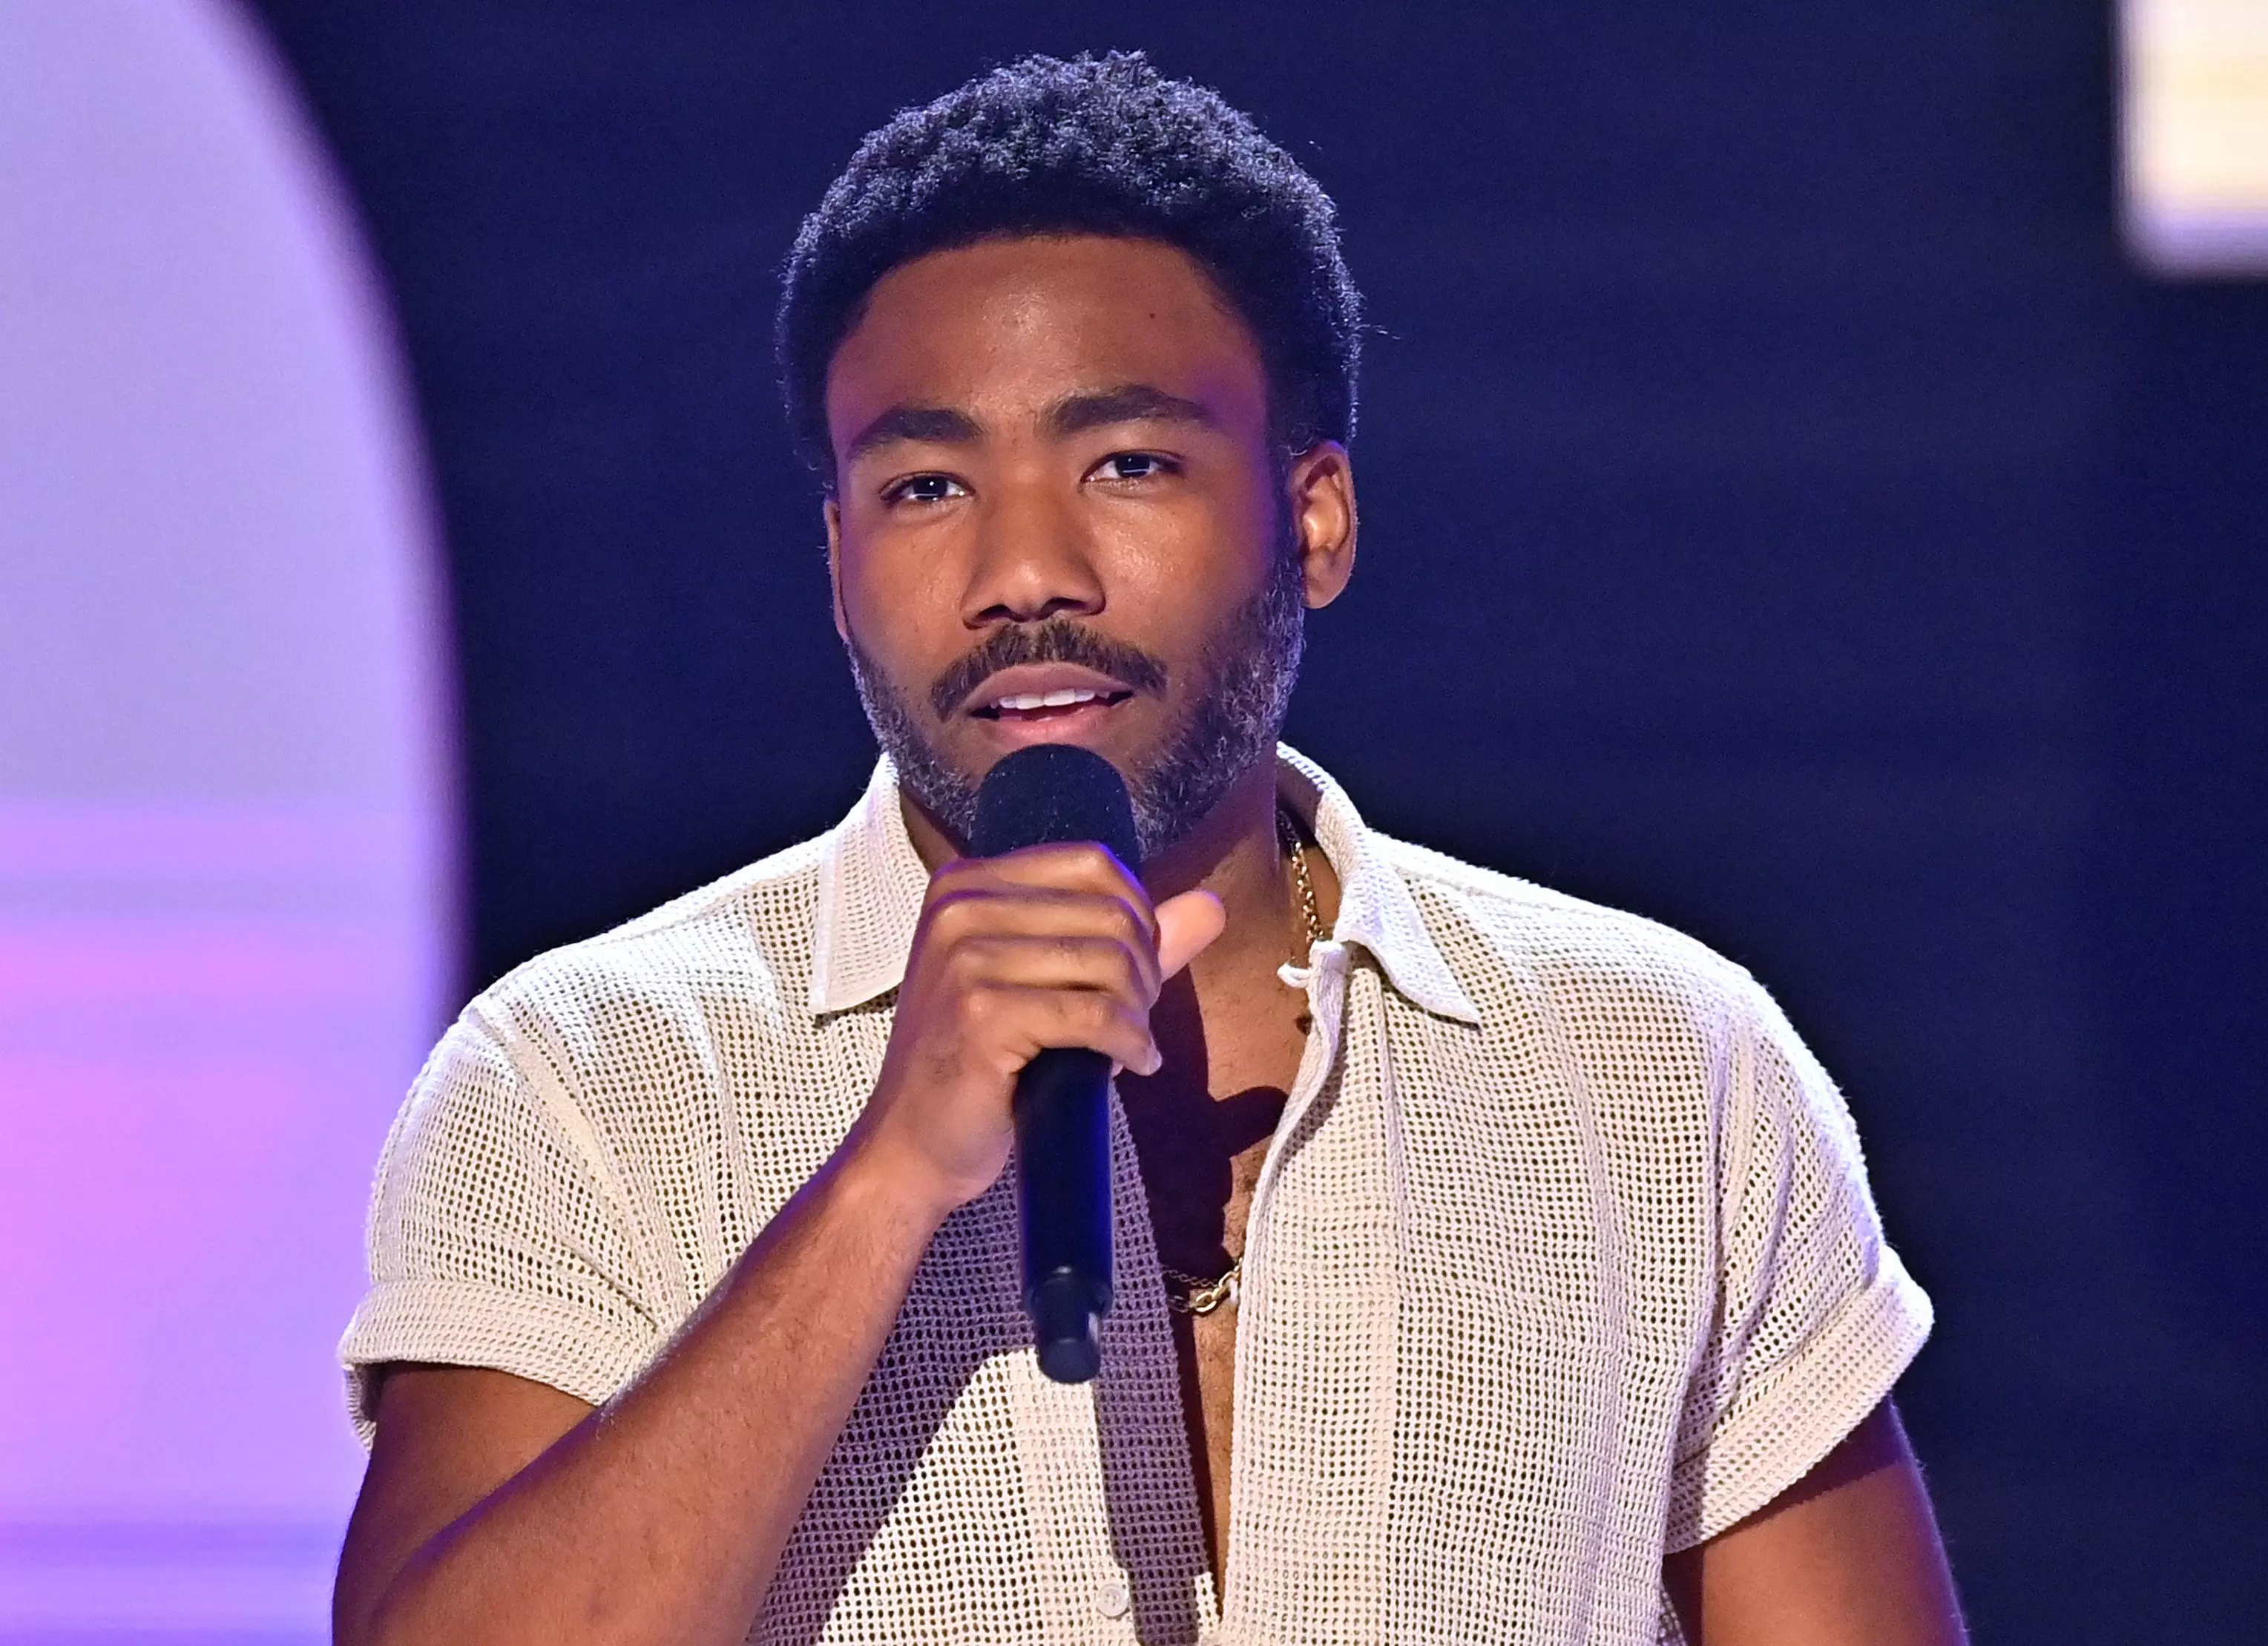 New Music Friday: Listen To New Releases From Childish Gambino, JT, Rauw Alejandro & More